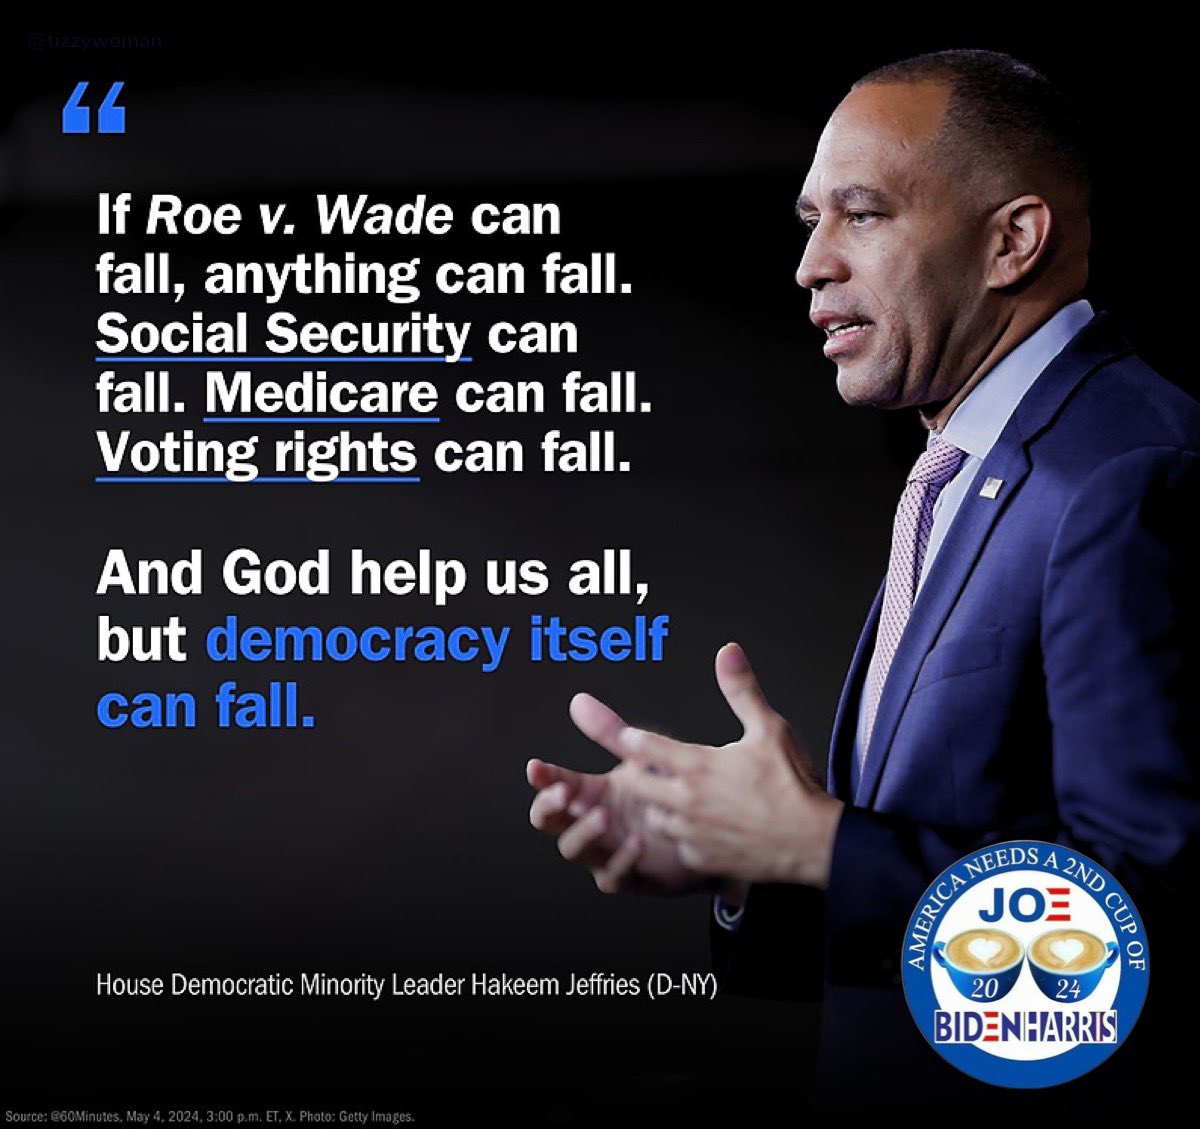 Hakeem Jeffries’ #CupOfJoe is full of honesty. He knows that MAGA Republicans are coming 4 everything including crucial programs & fundamental rights of millions of Americans all to benefit the rich & corrupt. Elect Democrats. #RoeYourVote #BidenHarris4More #DemsUnited